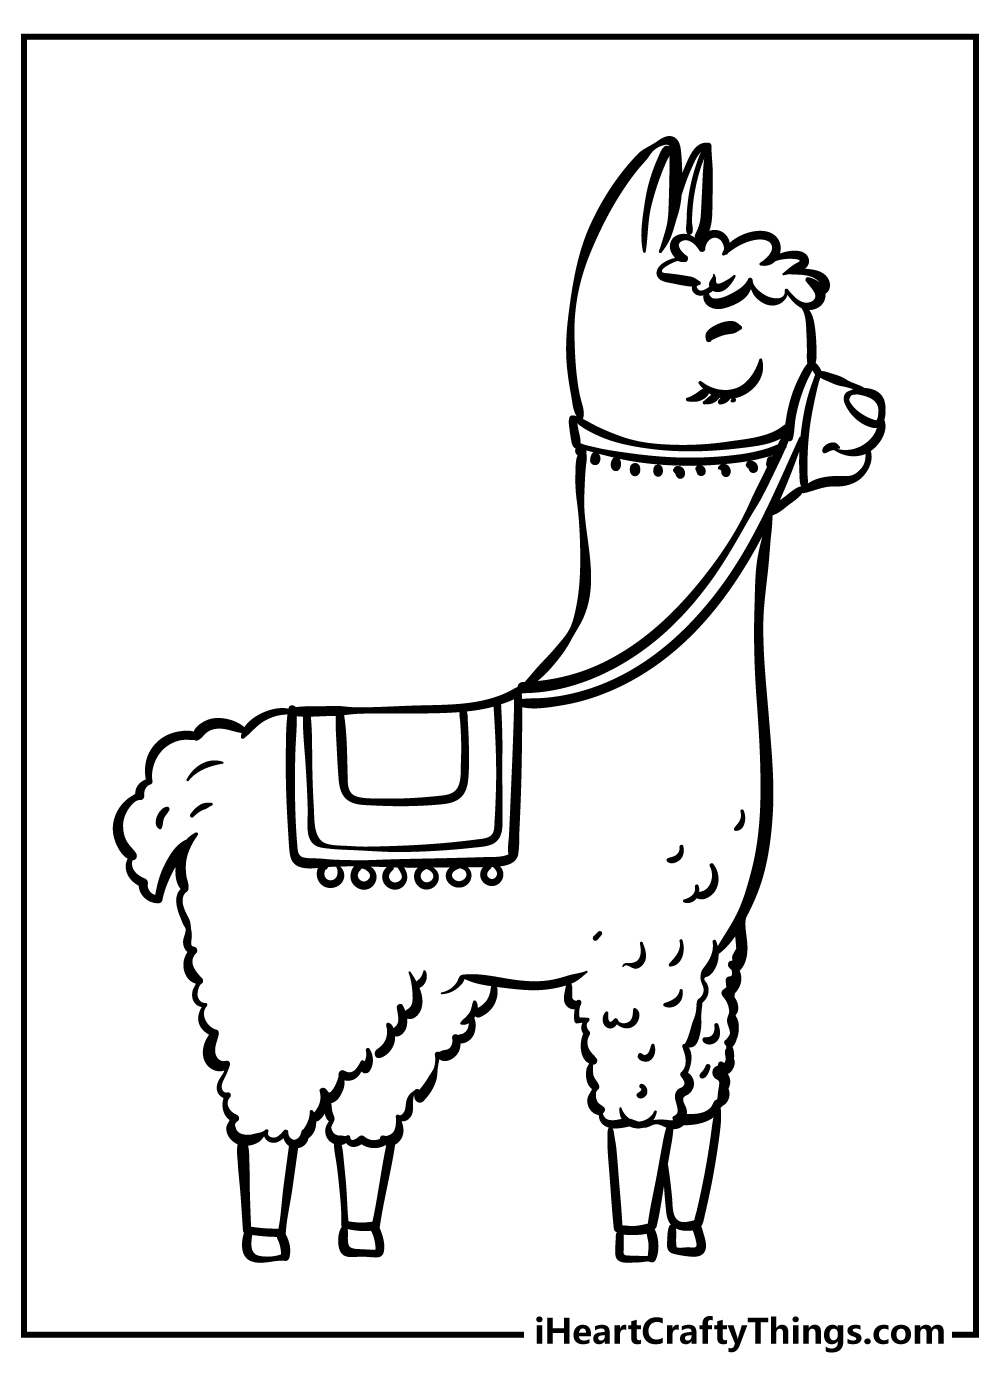 llama Coloring Pages for preschoolers free printable